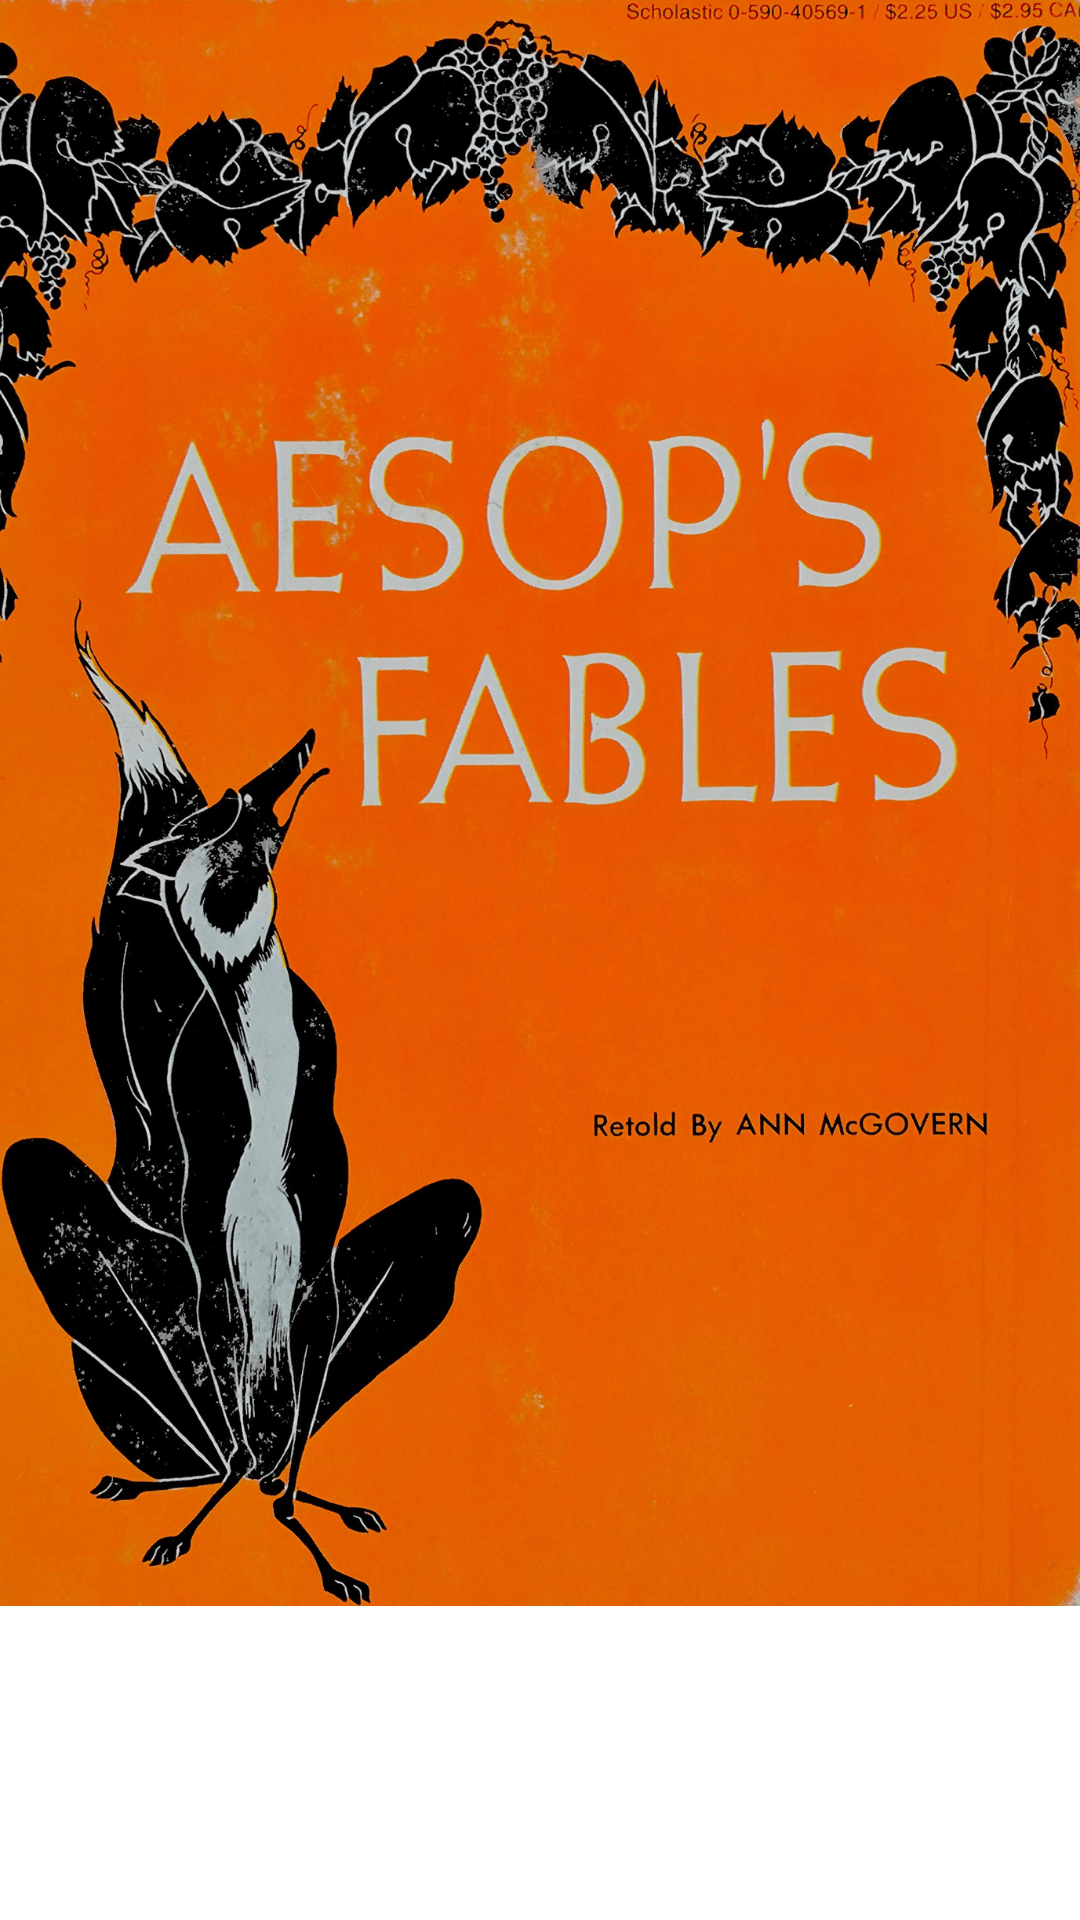 Aesop's Fables by Ann McGovern